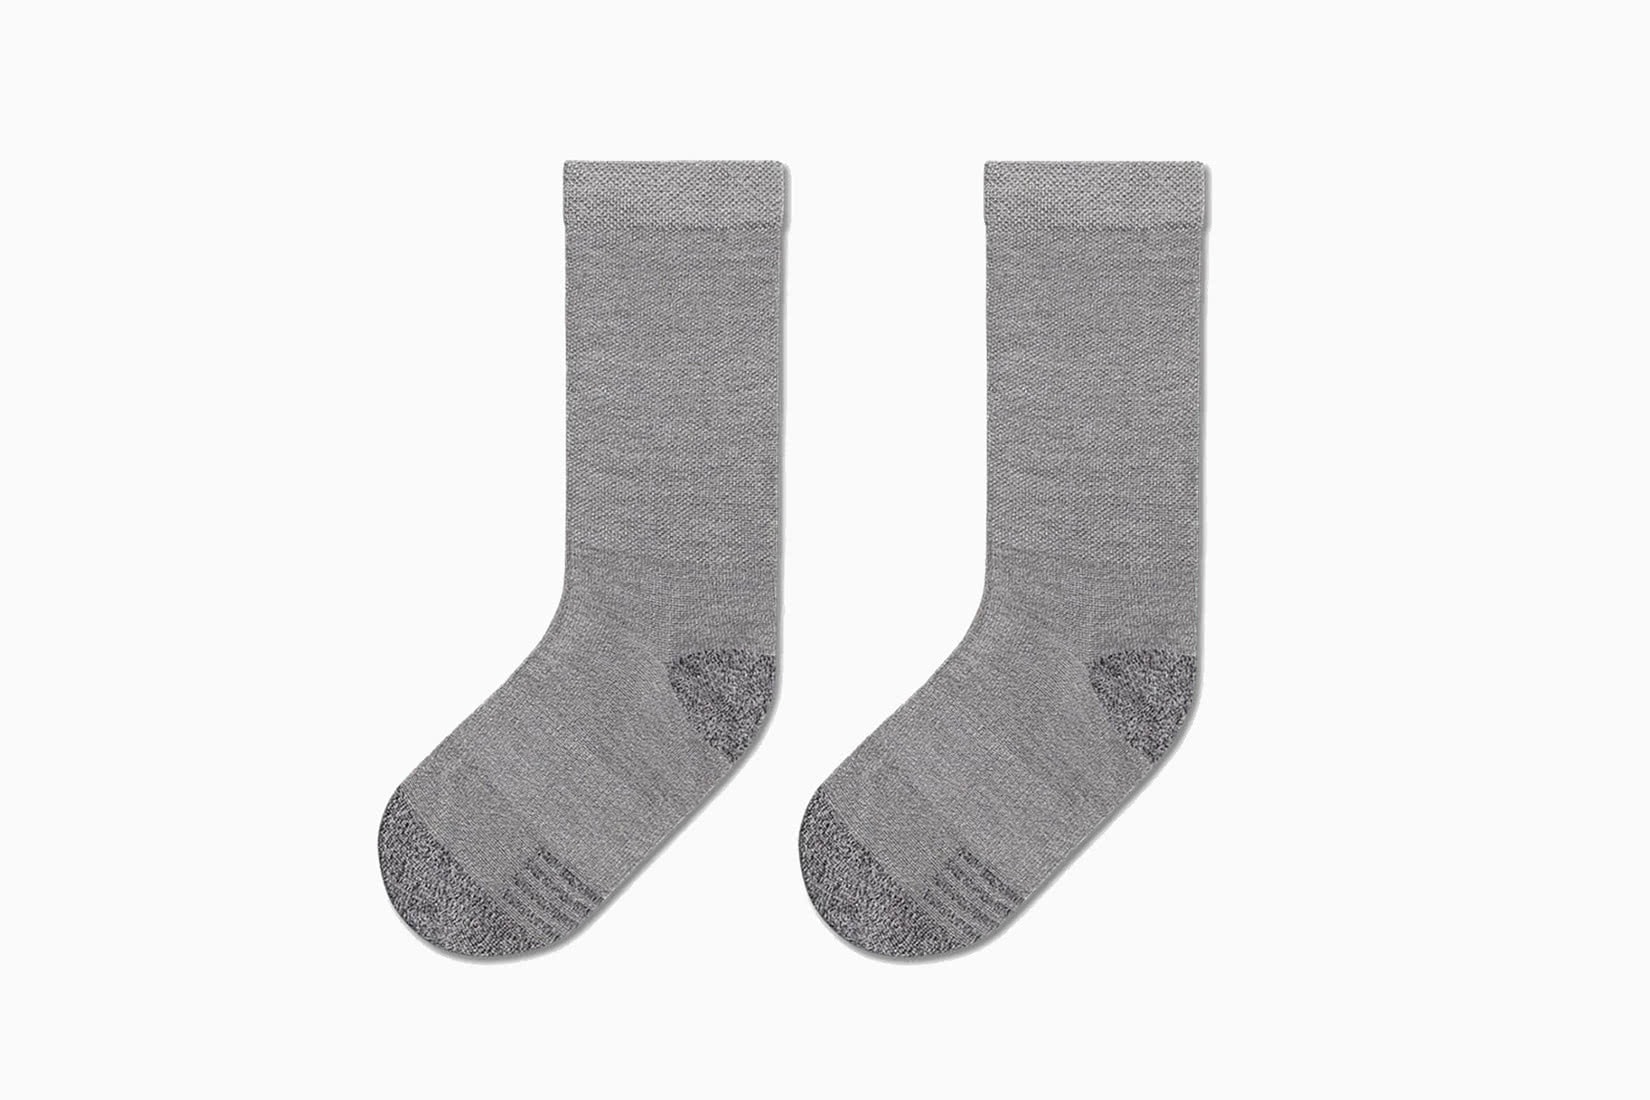 Mens Classic Cotton Dress Socks Thin Lightweight for Office Business Non-binding Comfortable Casual Crew Socks Black 6 Pack 